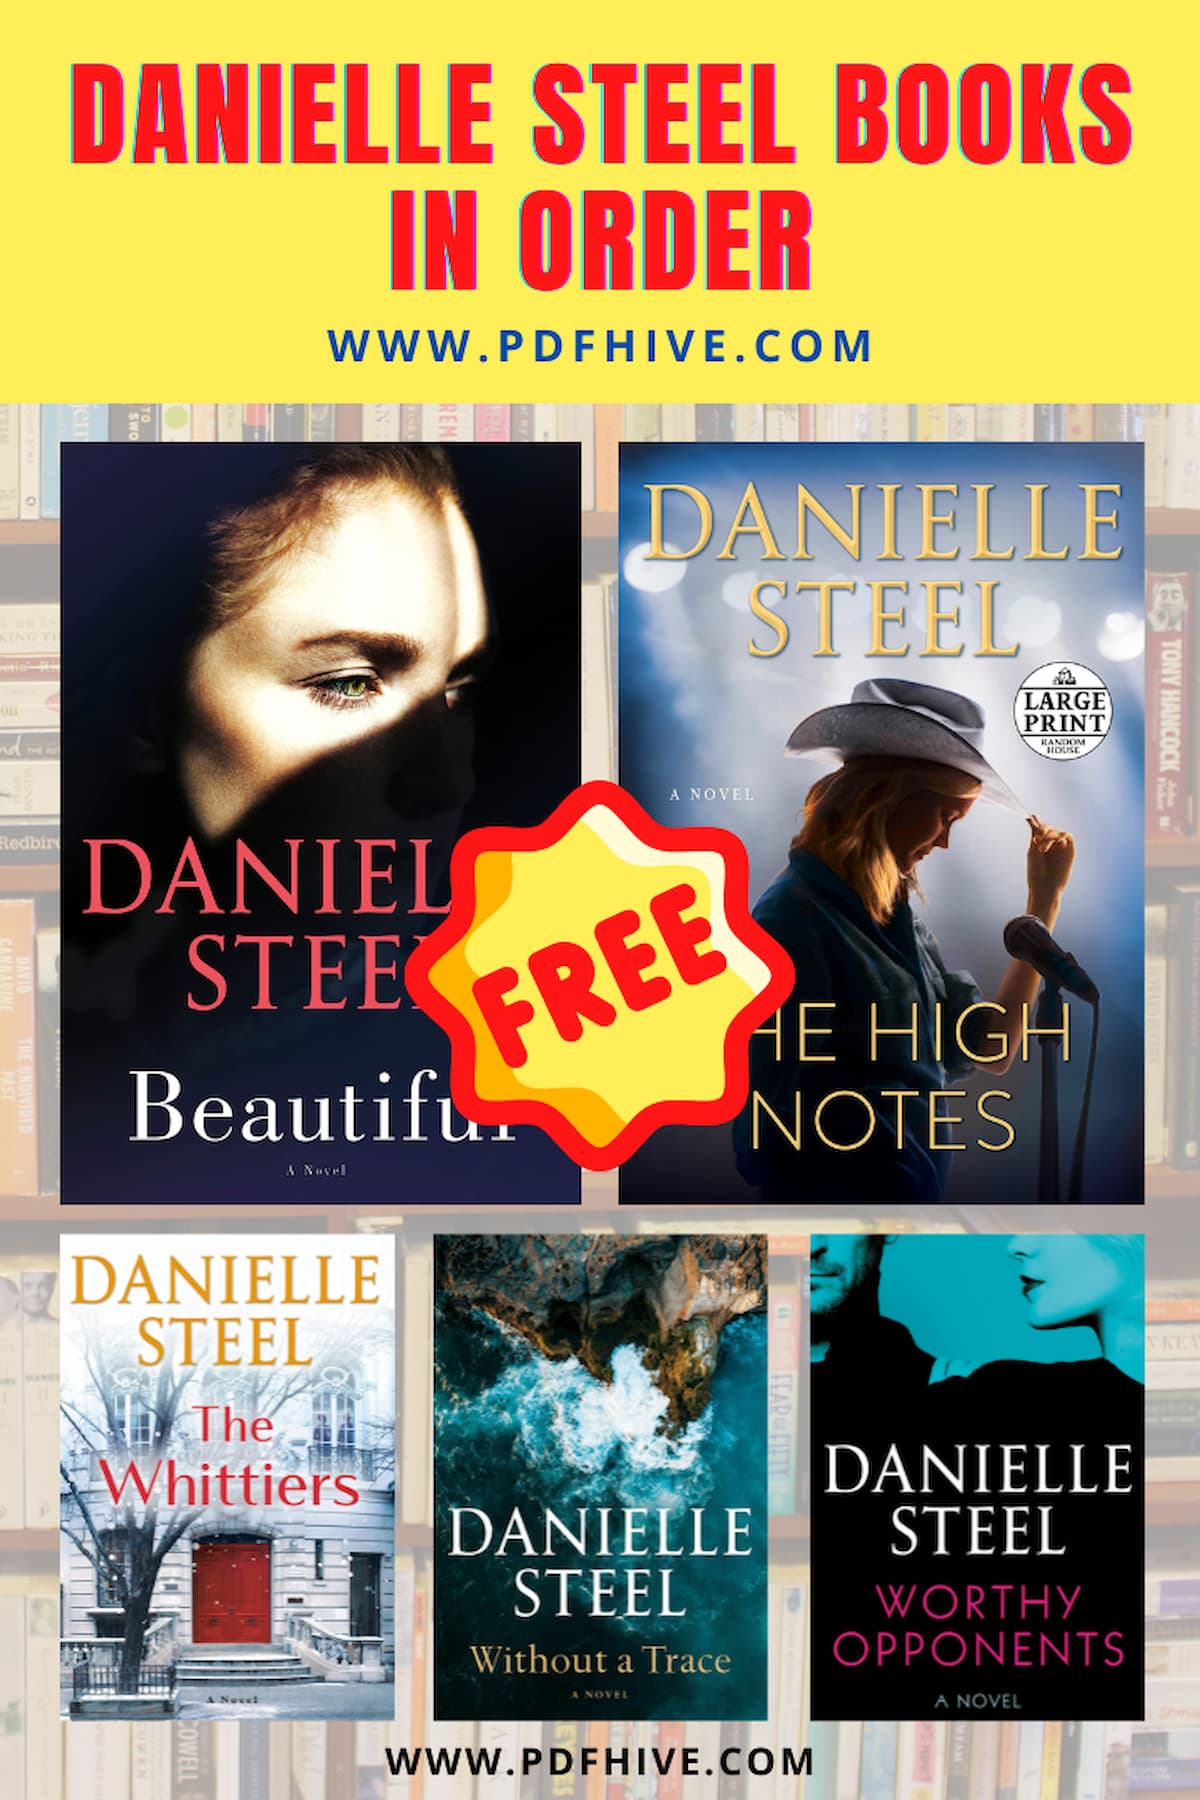 Bestsellers, Book Series, Book Series In Order, Books In Order, Chick Lit, Contemporary Romance, Danielle Steel Books In Order, Women's Fiction